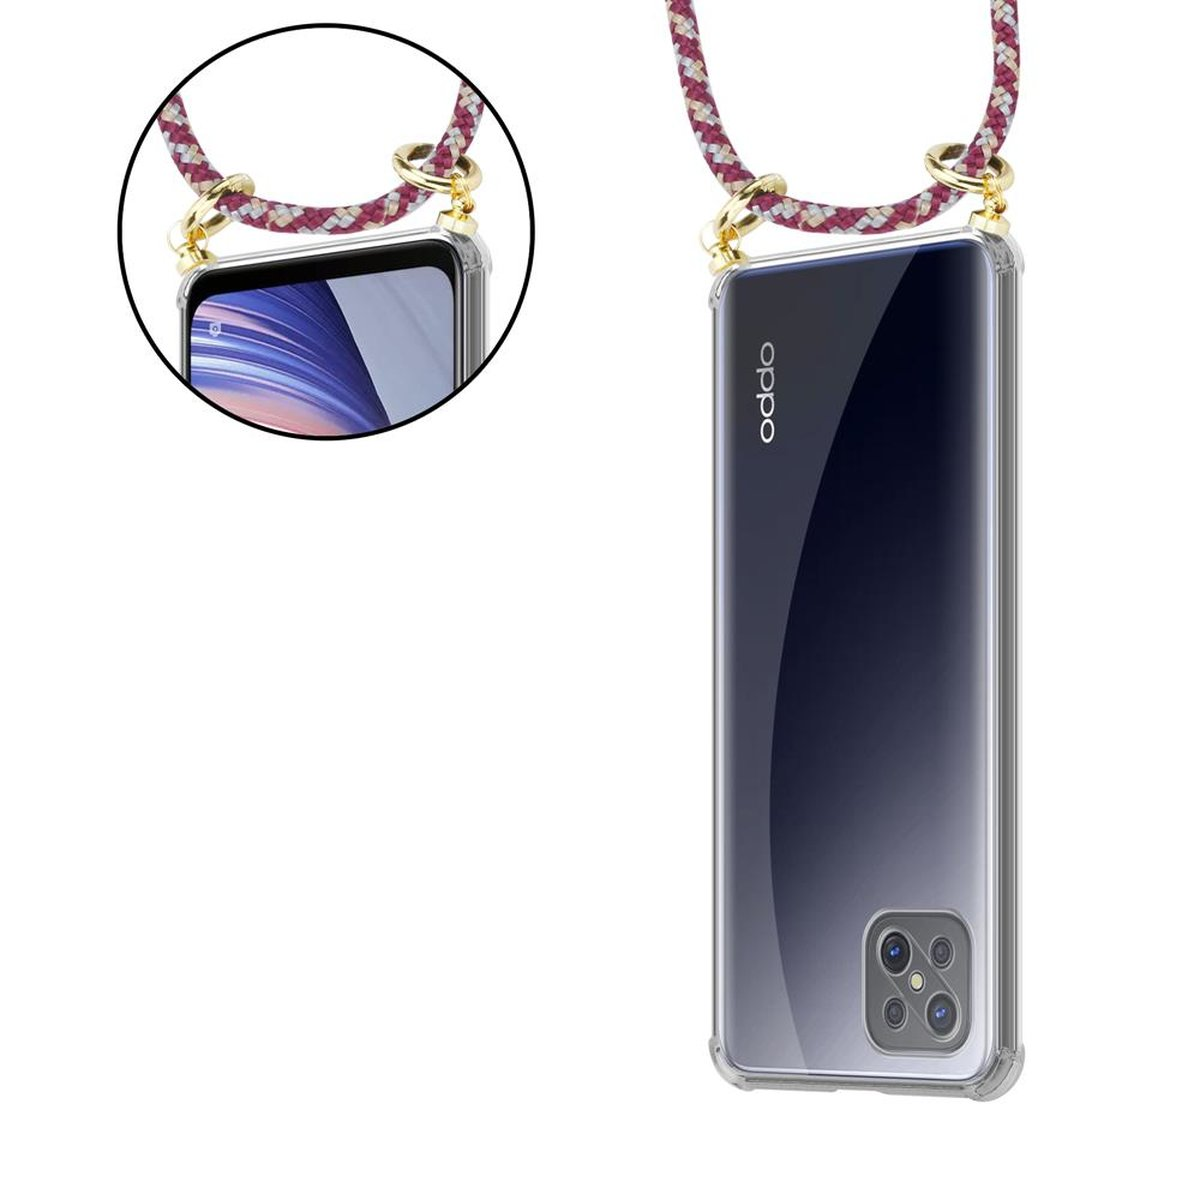 CADORABO Handy Oppo, Ringen, Gold GELB WEIß ROT abnehmbarer Band mit und Hülle, Kordel A92s, Kette Backcover